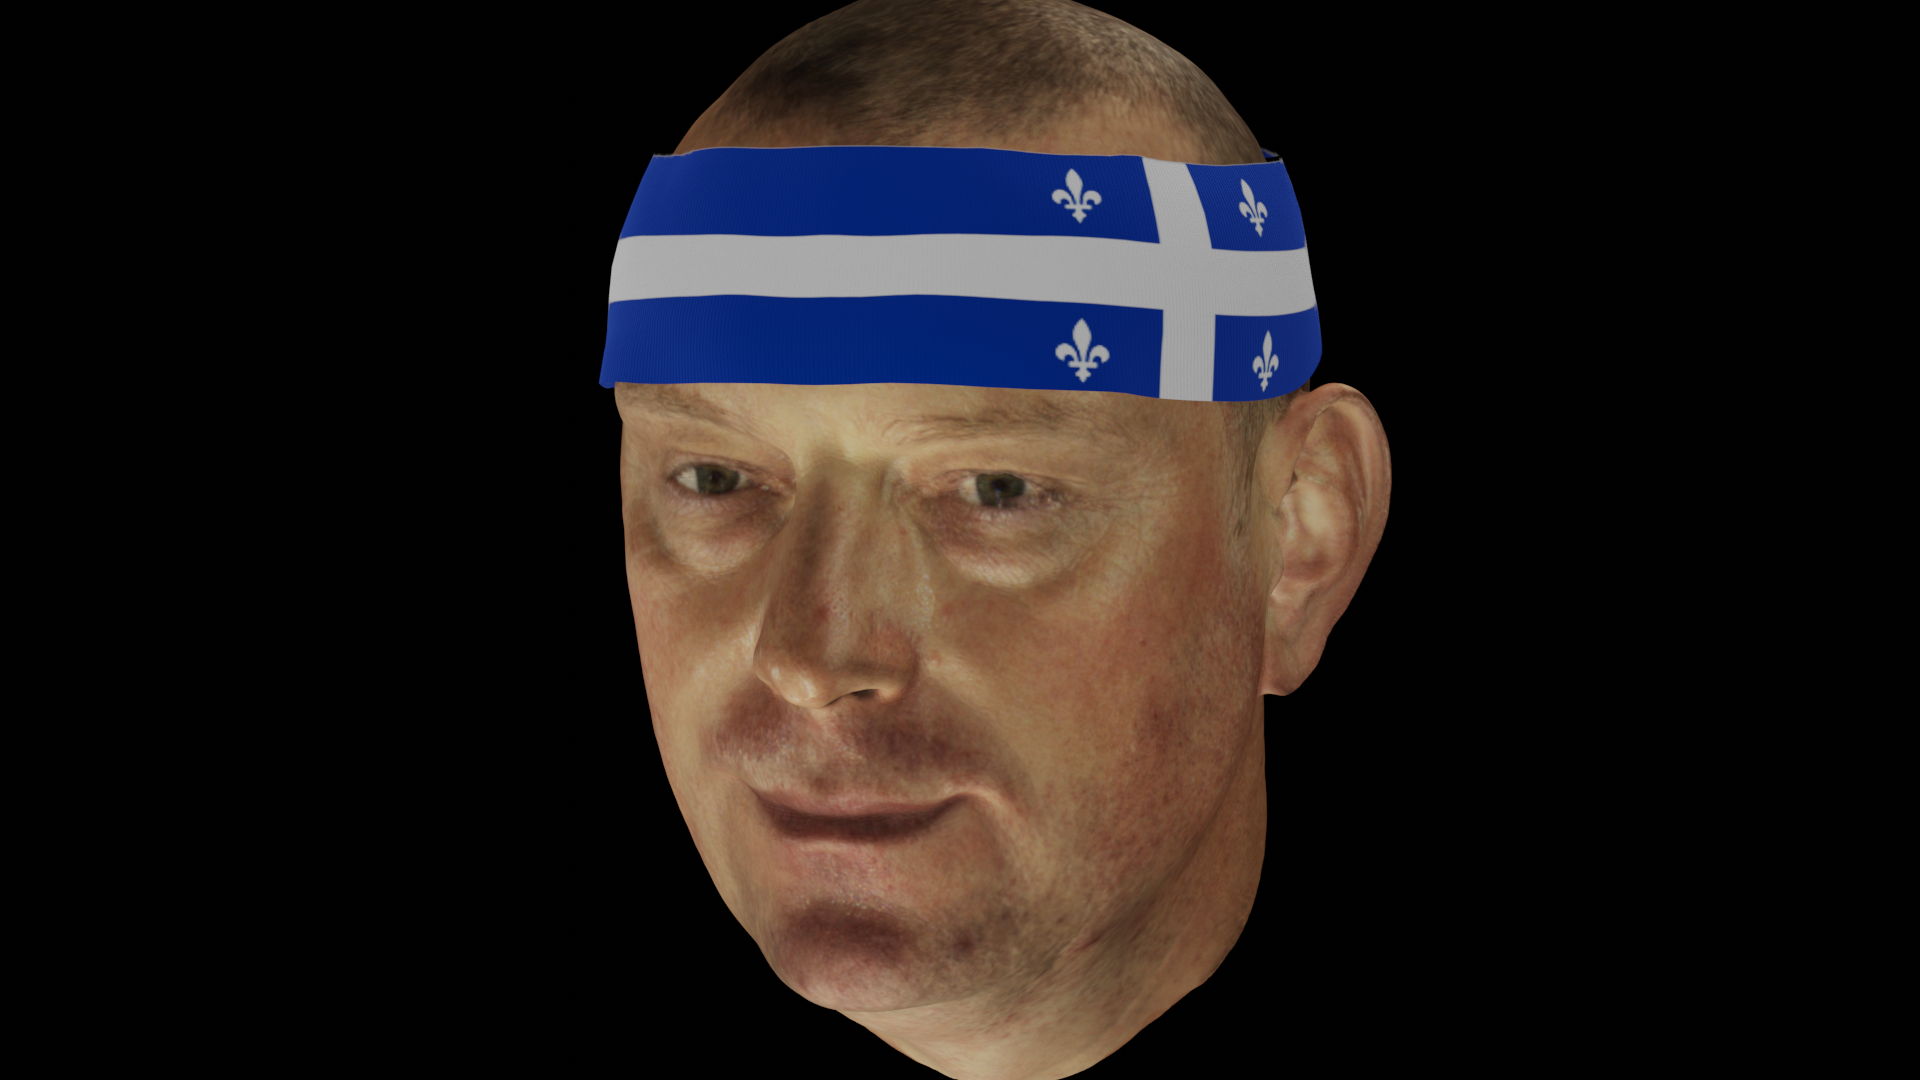 Halo II Quebec Flag design now available!